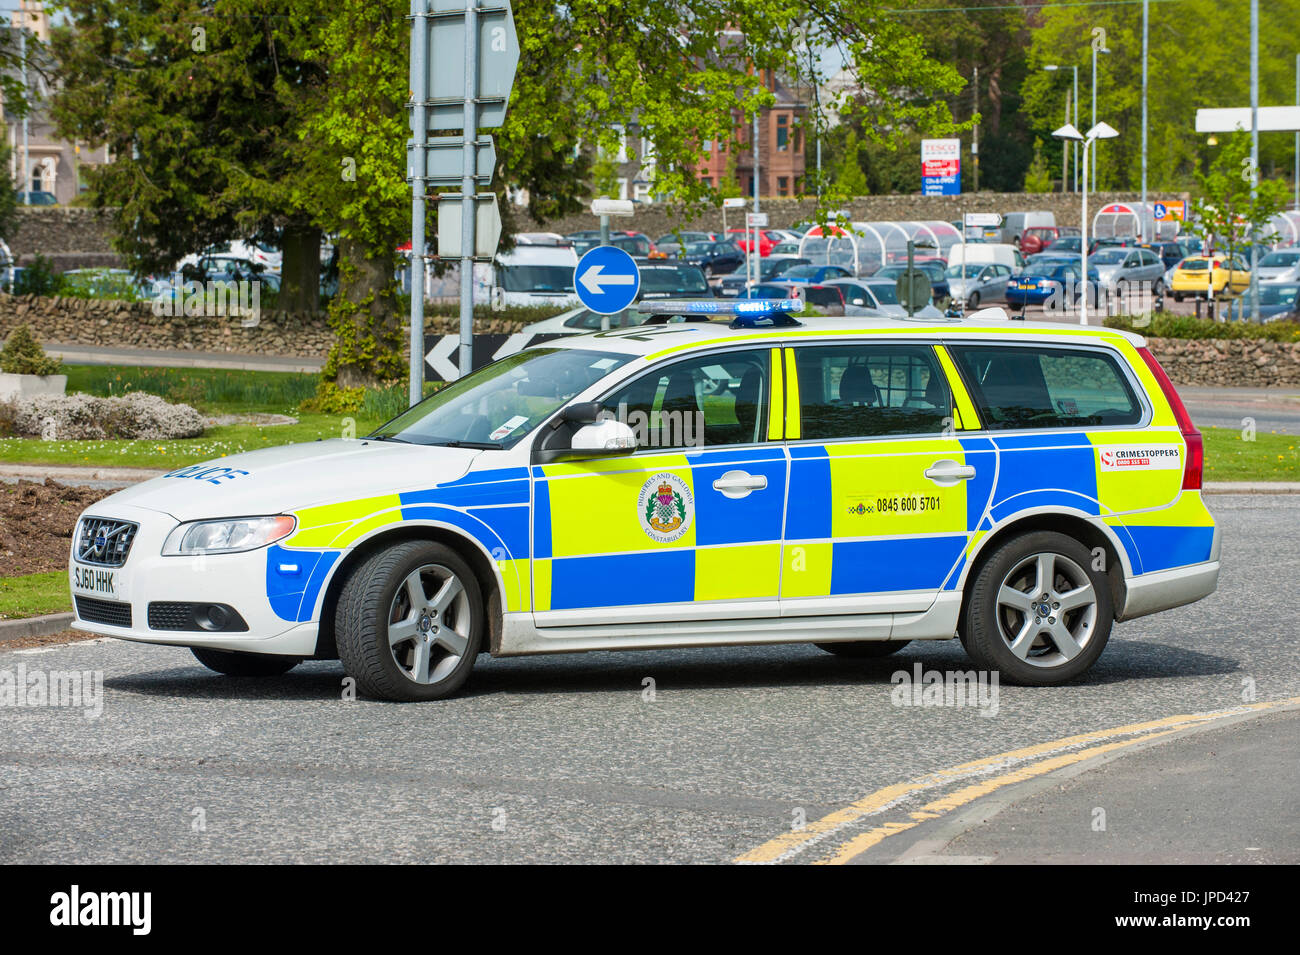 Castle Douglas, Scotland - April 25, 2011: A police car that is being used as a road block. The road was closed Stock Photo